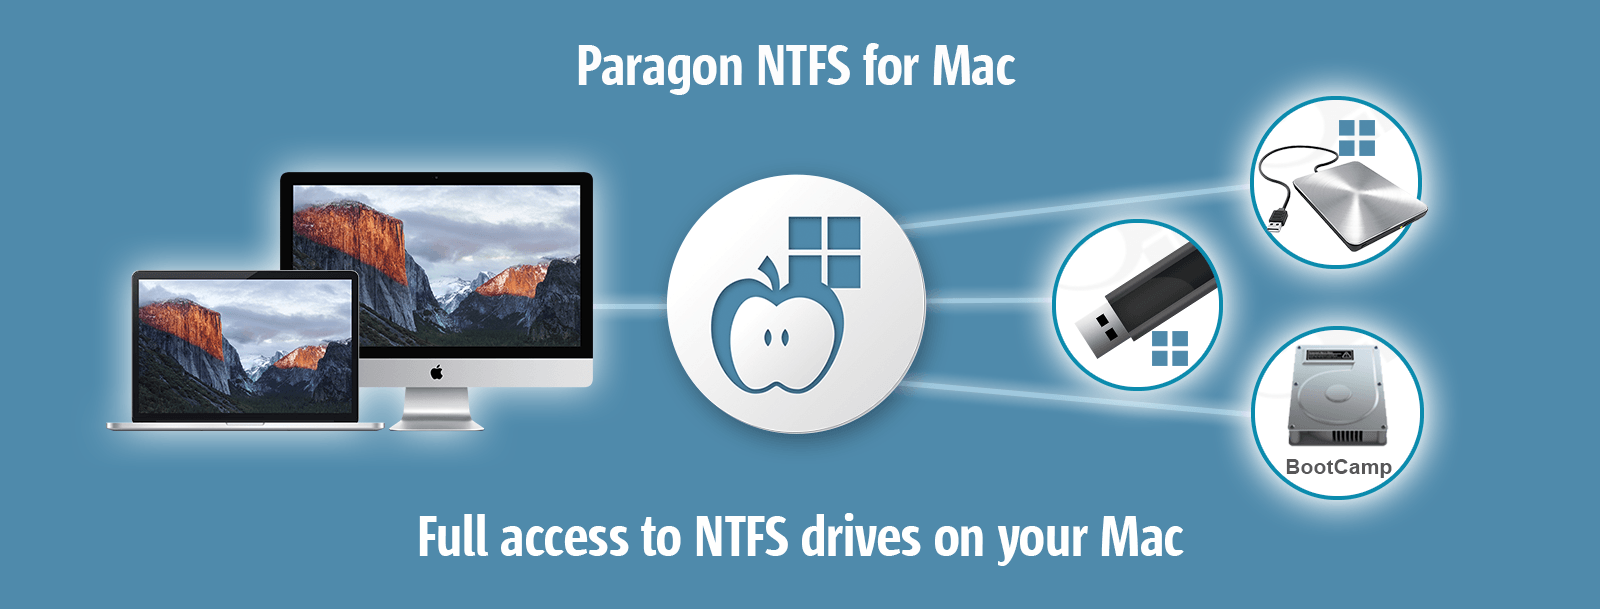 What is ntfs for macs